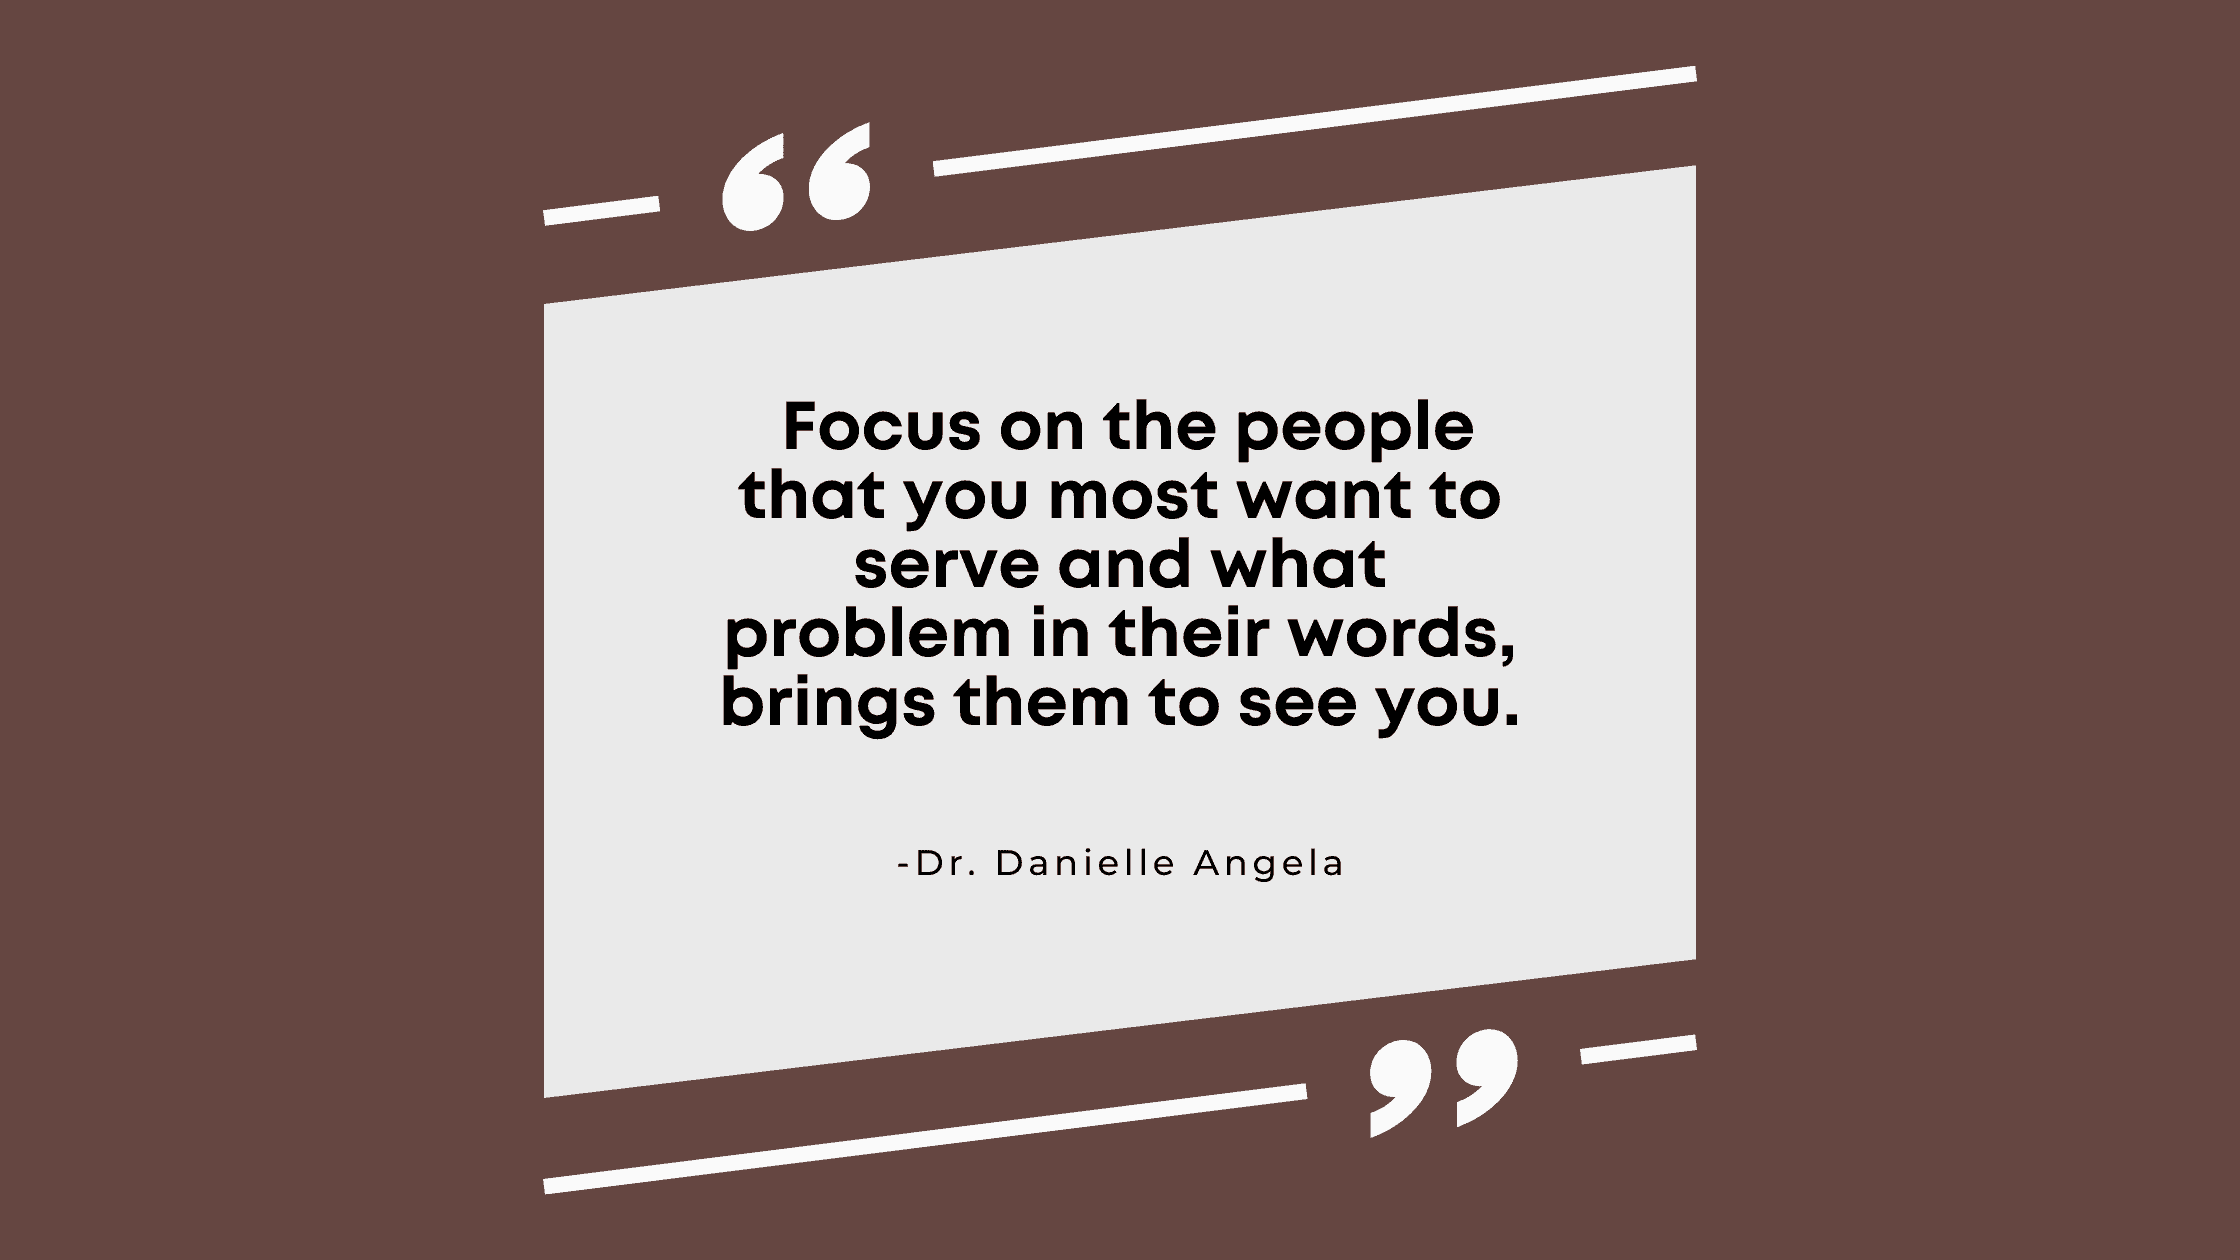 focus on the people that you most want to serve and what problem in their words, brings them to see you